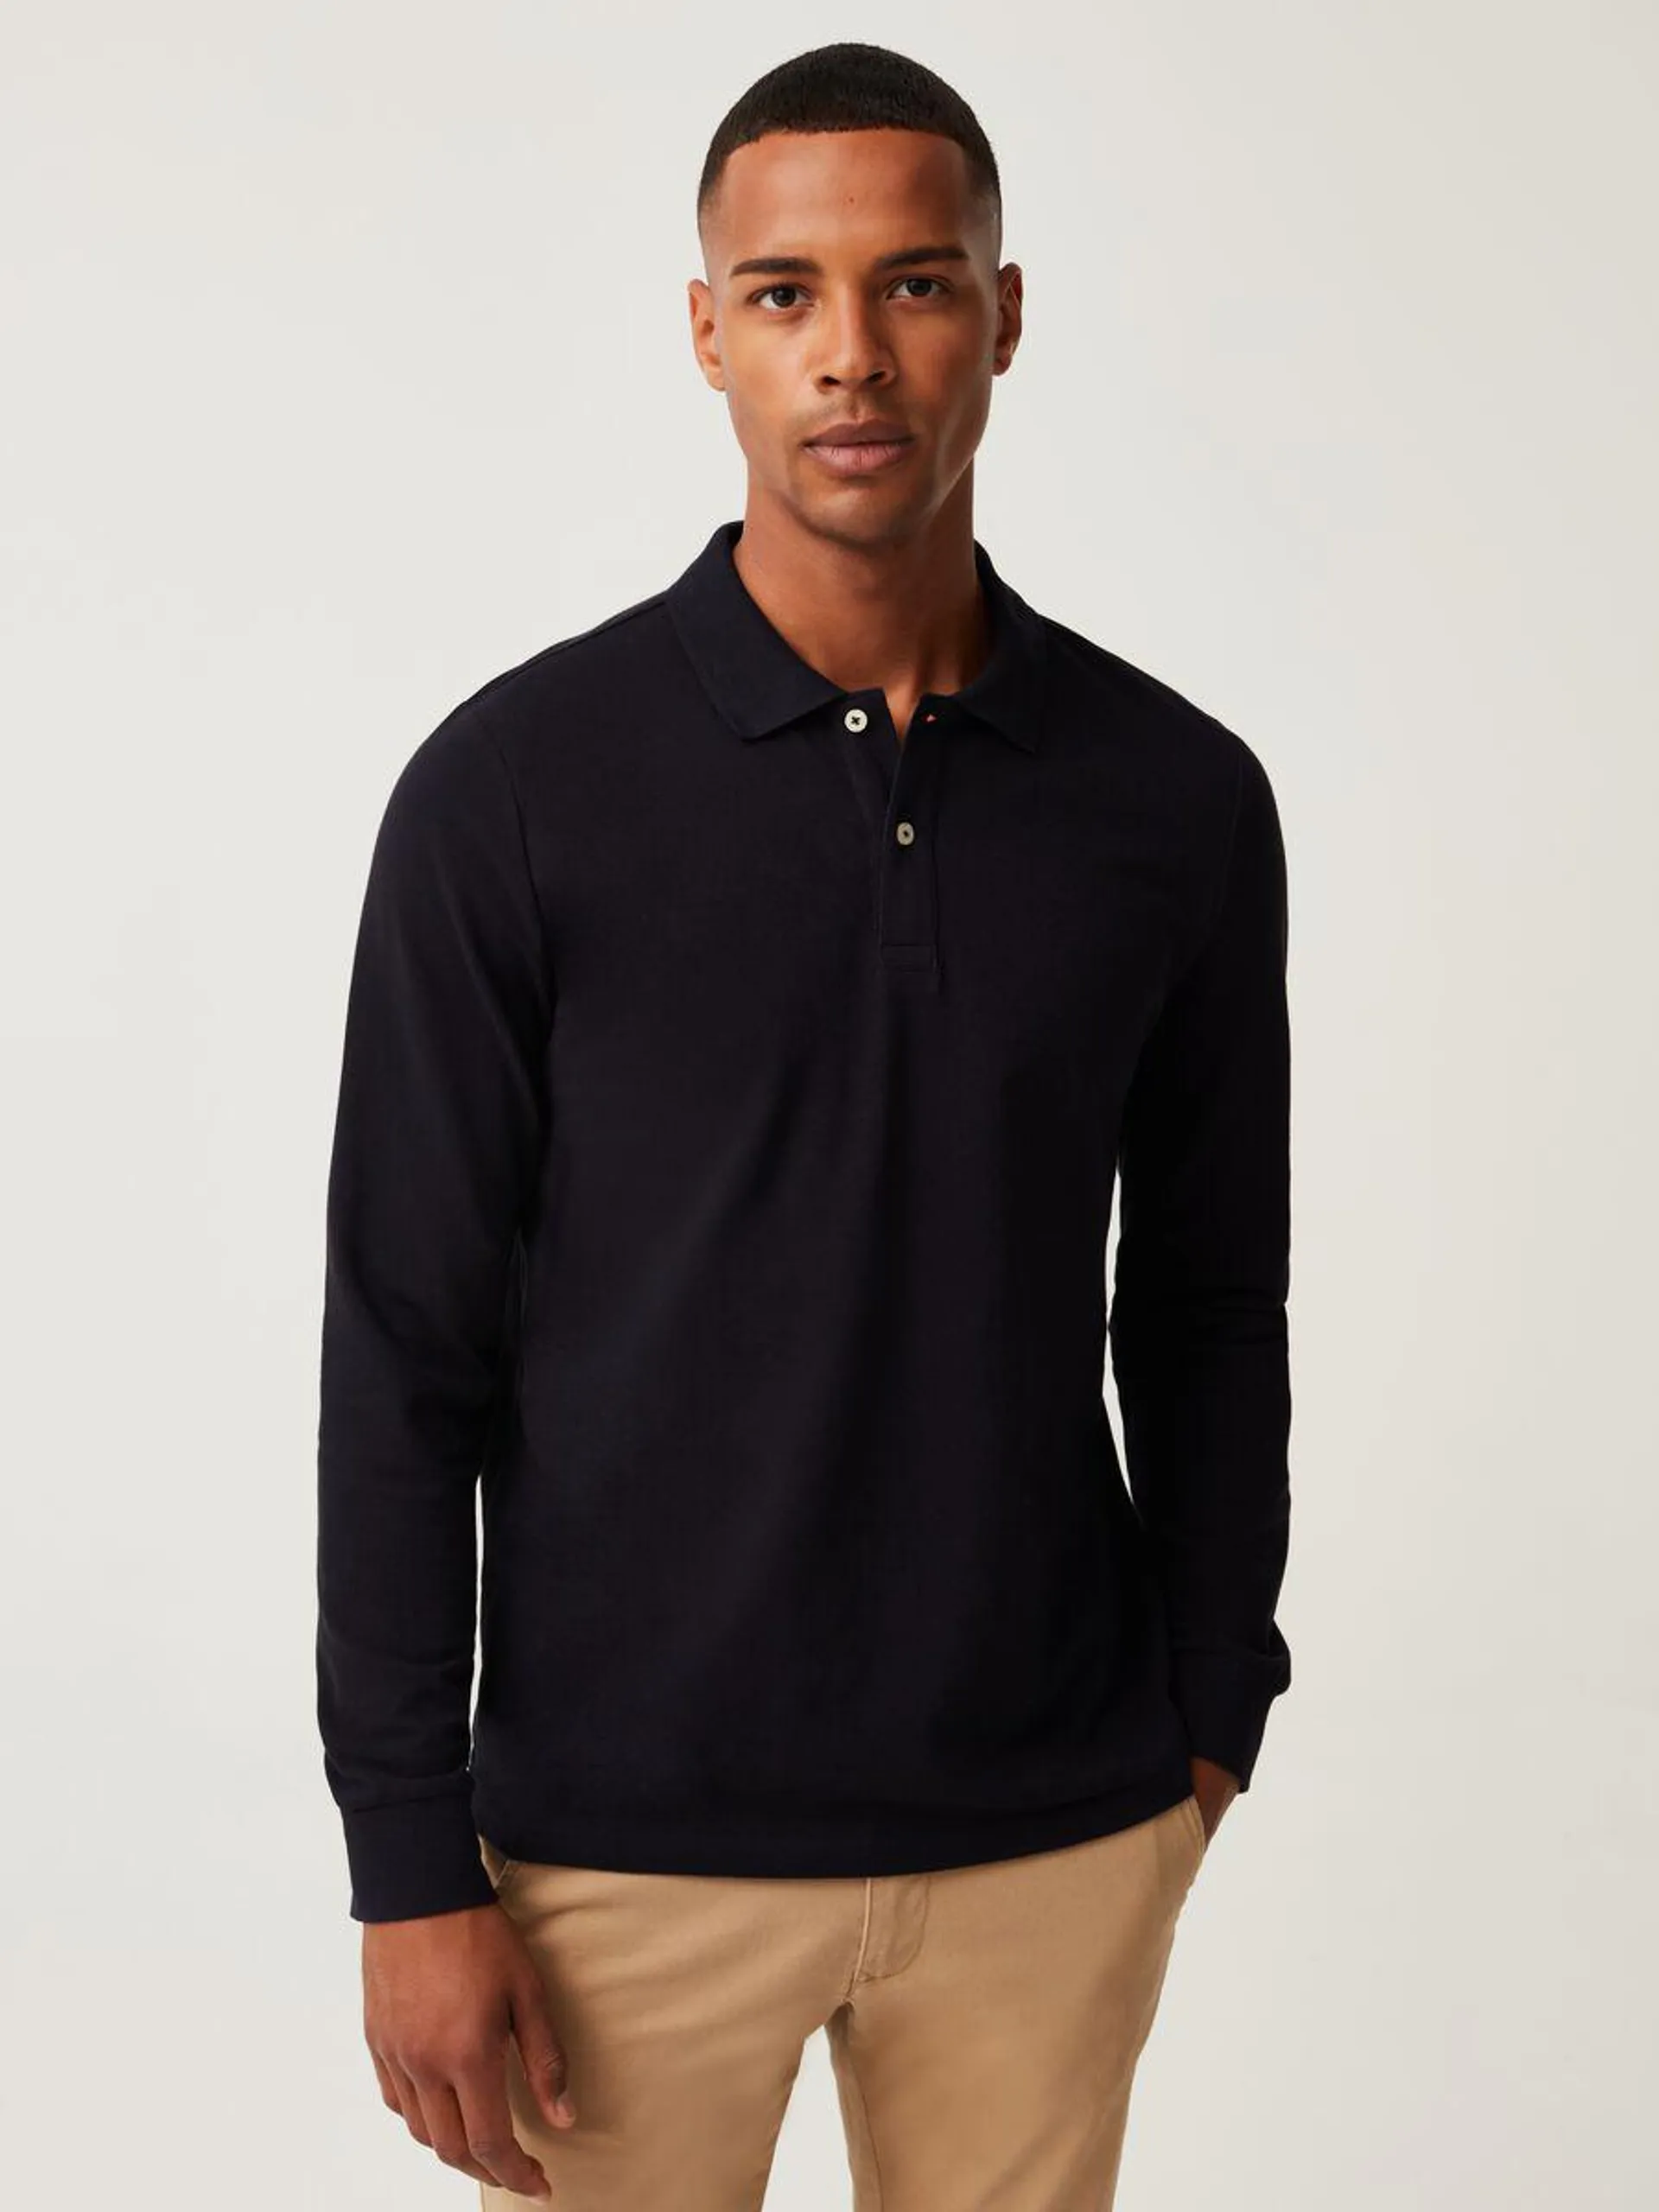 Cotton piquet polo shirt with long sleeves.